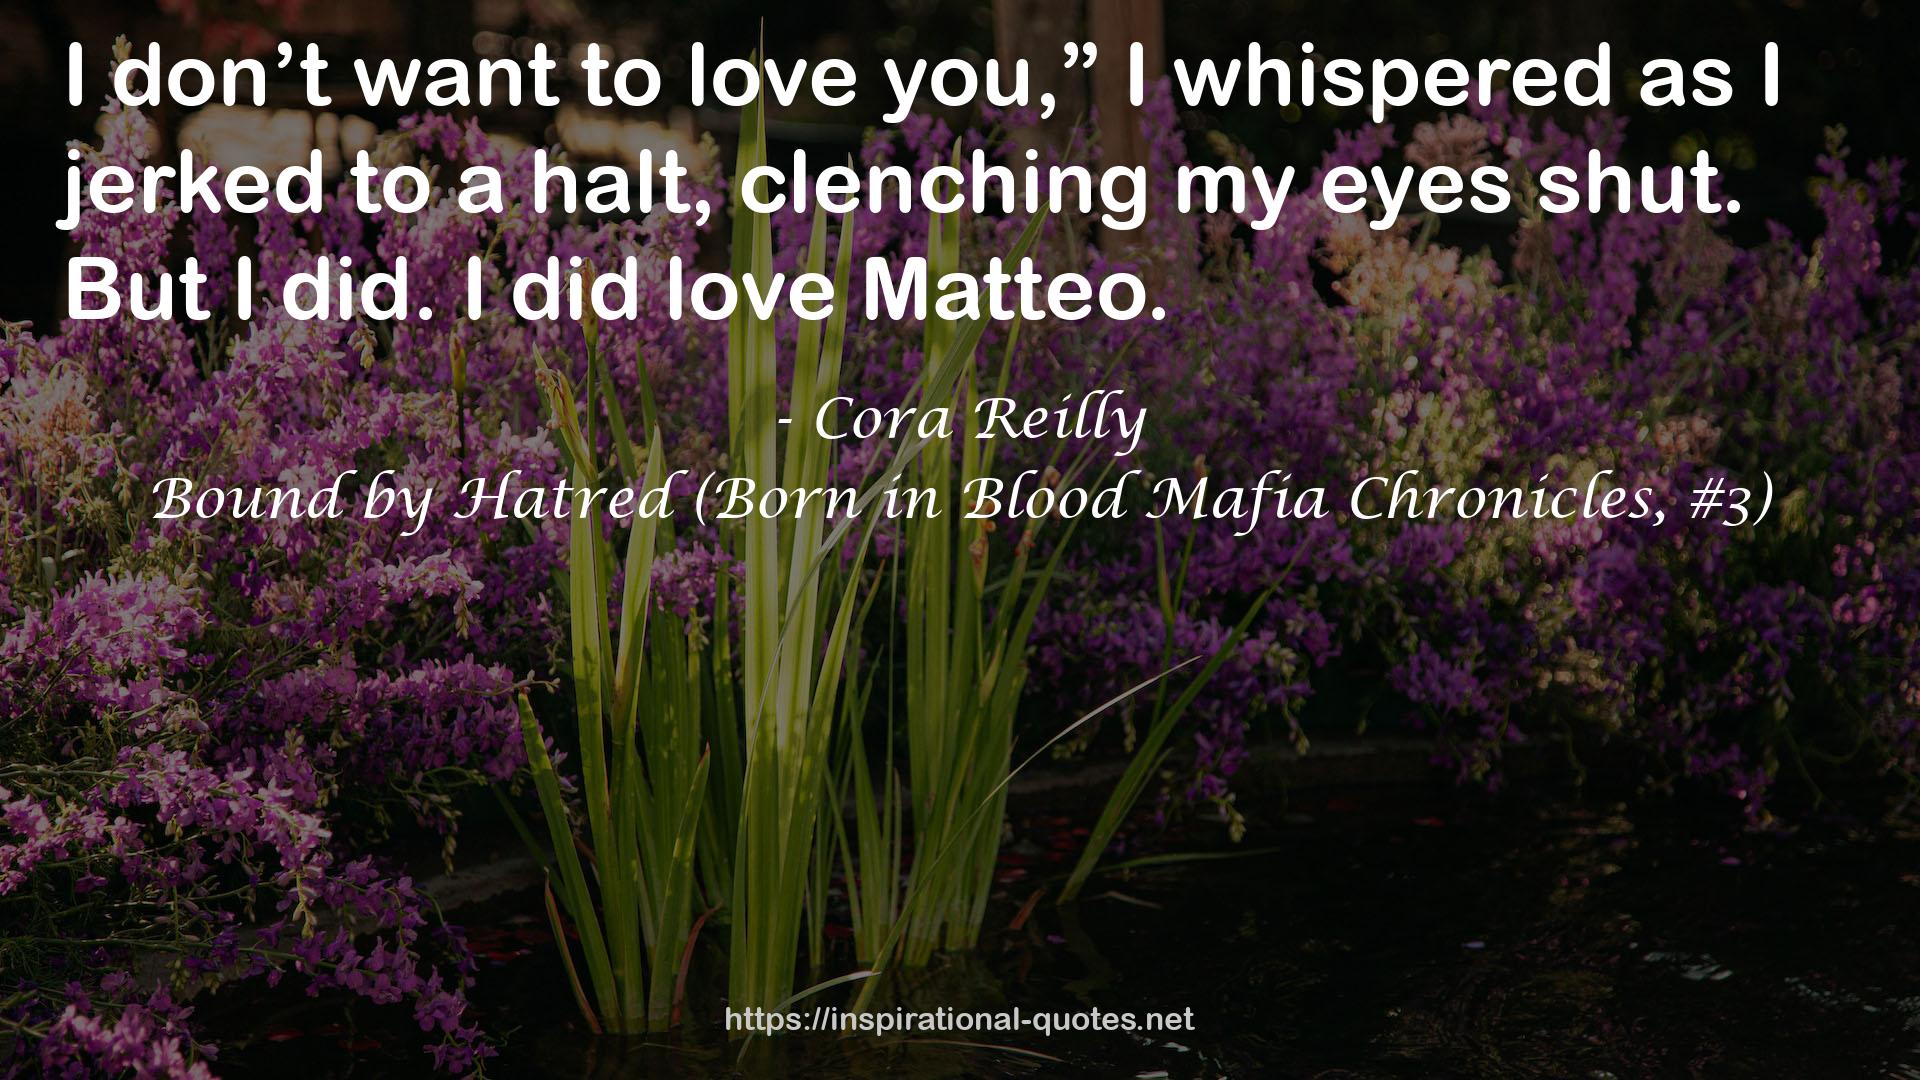 Bound by Hatred (Born in Blood Mafia Chronicles, #3) QUOTES